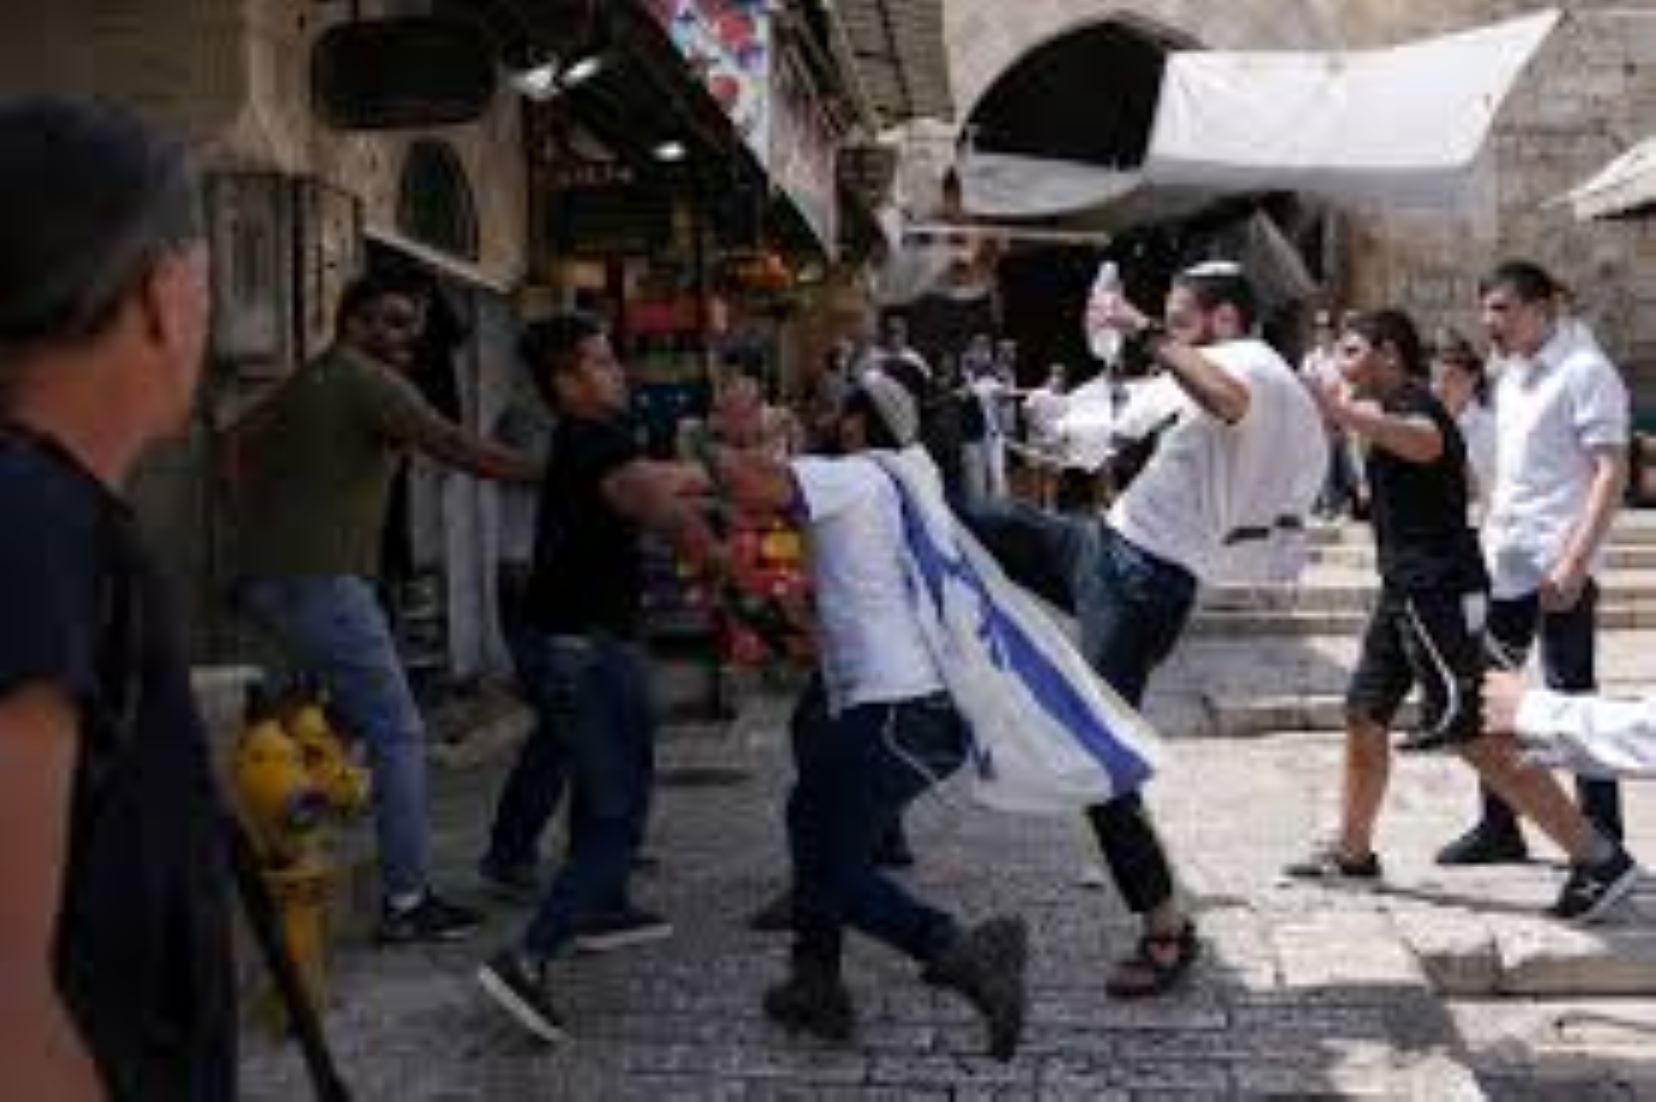 Palestine Condemns Israel’s Plan To Hold “Flag March” In Jerusalem